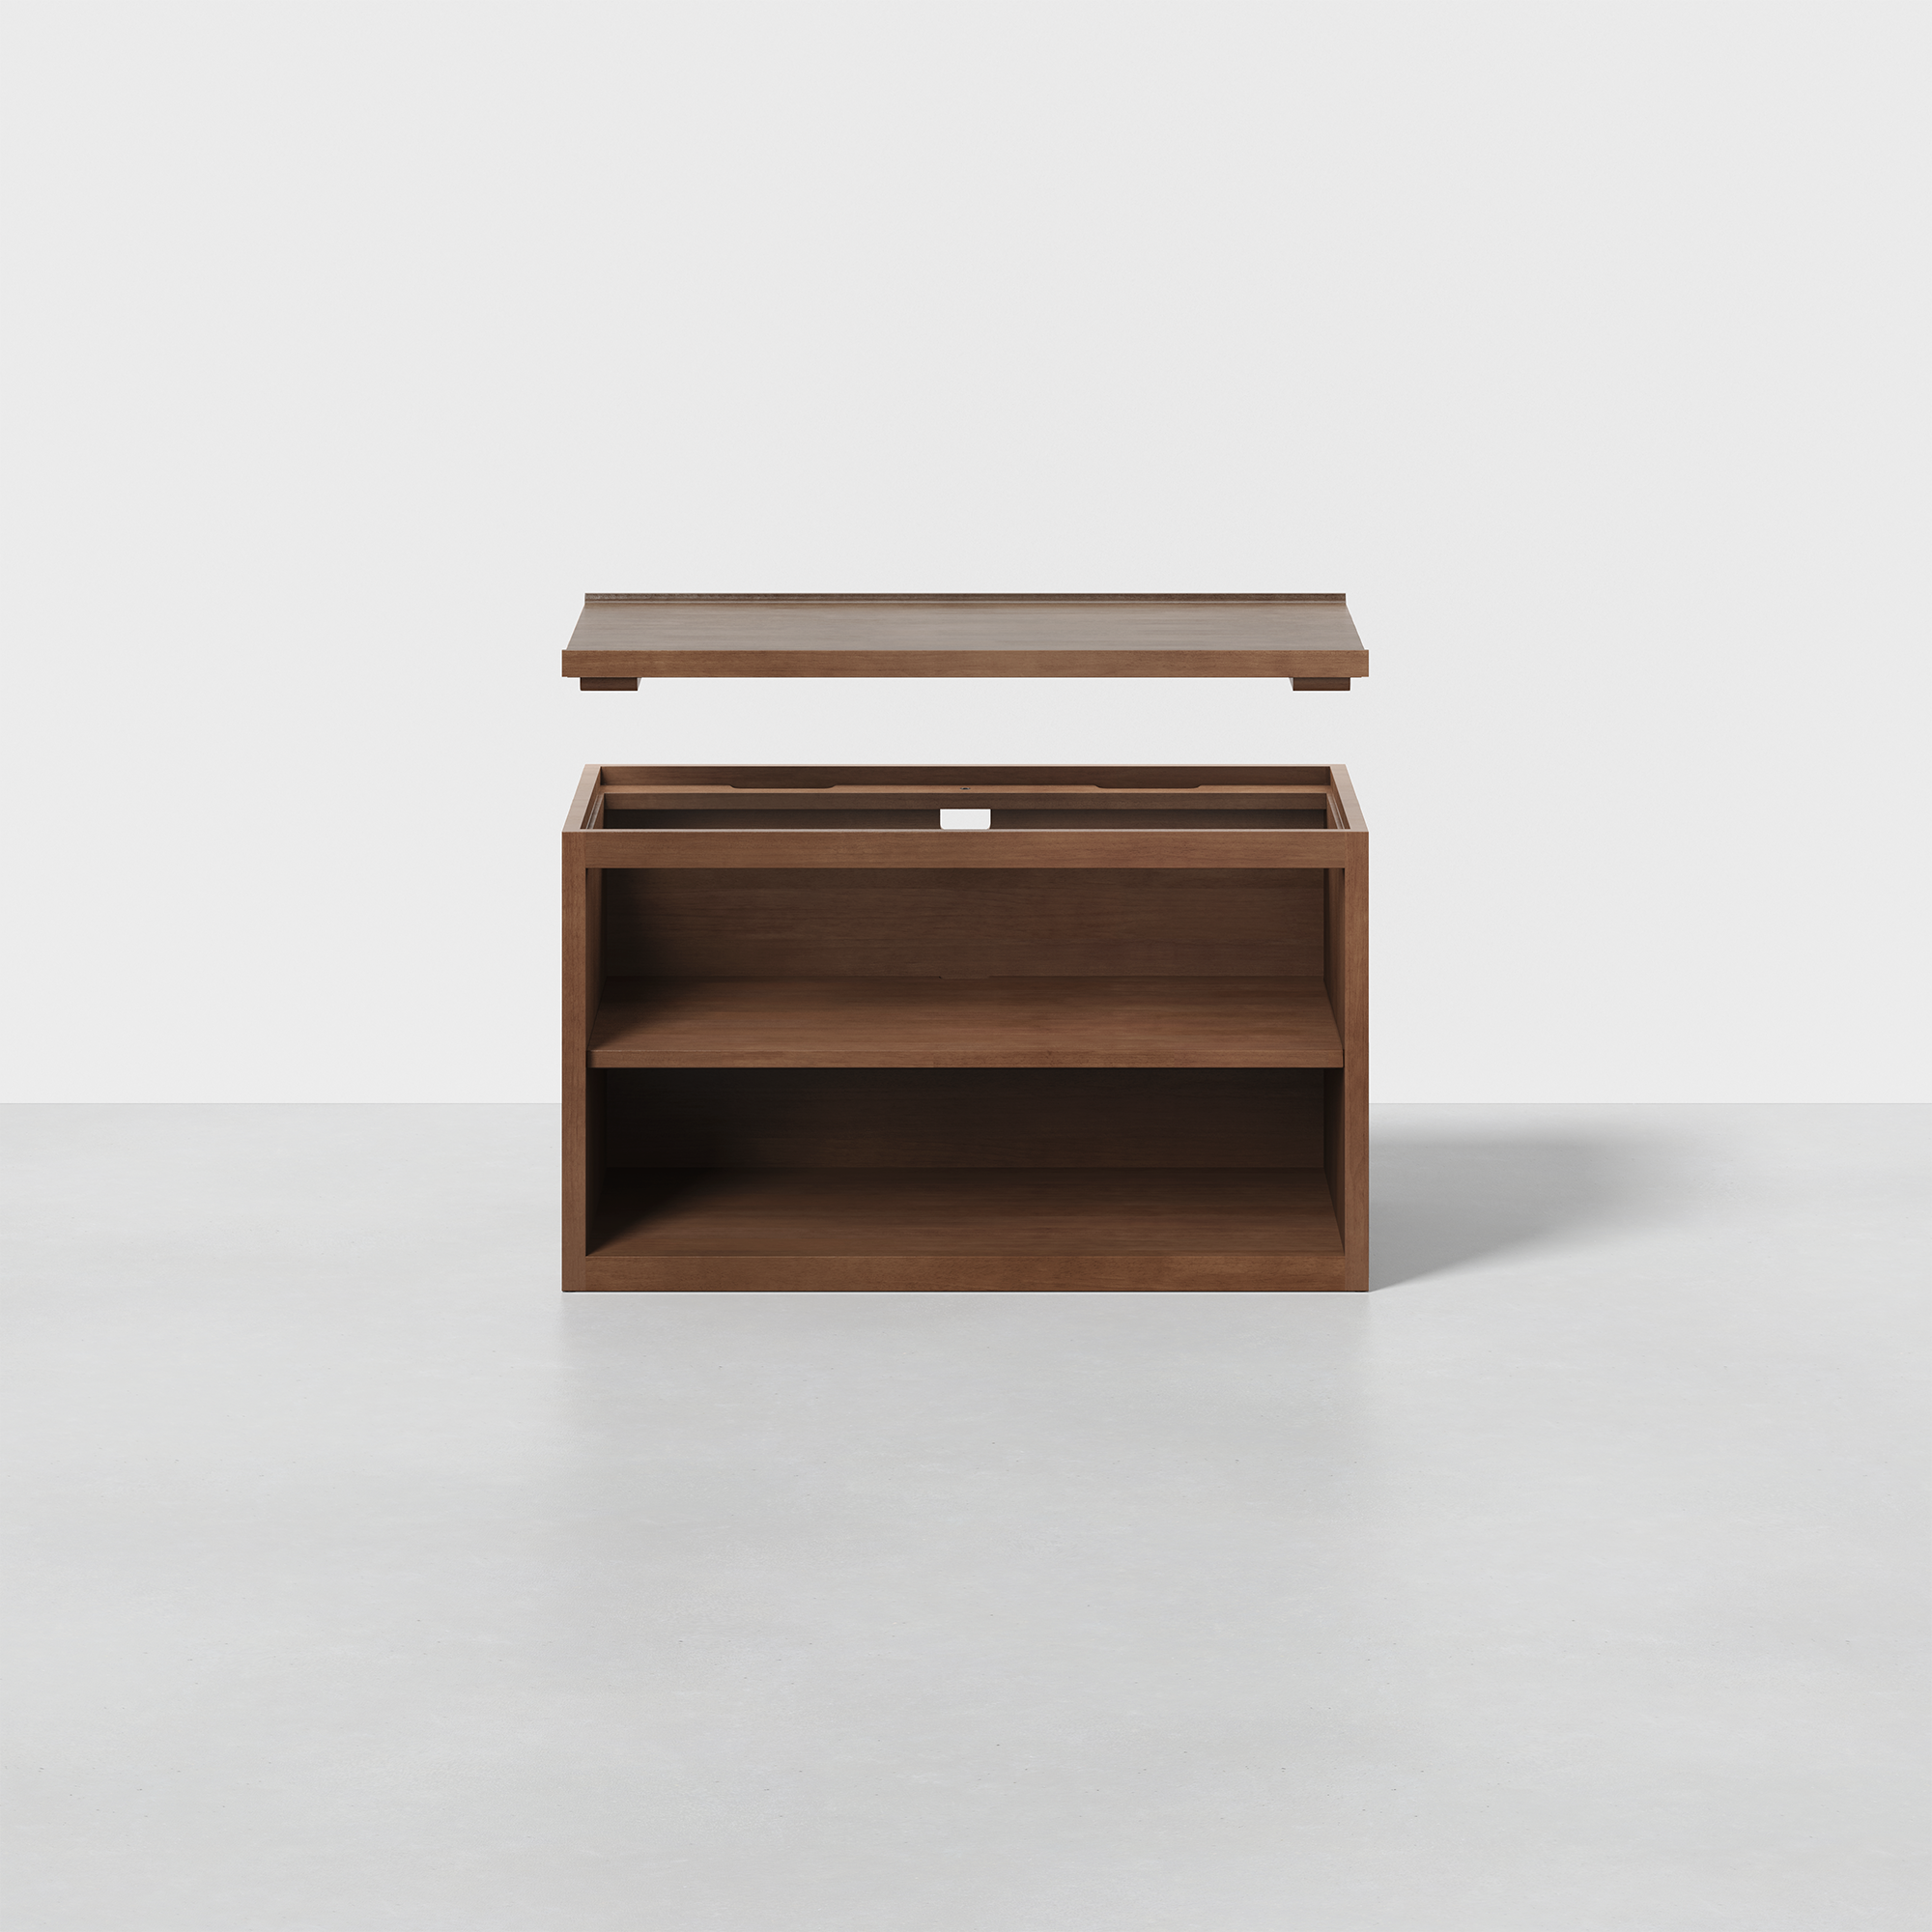 The Cubby (Walnut / Base Cubby) - Render - Front